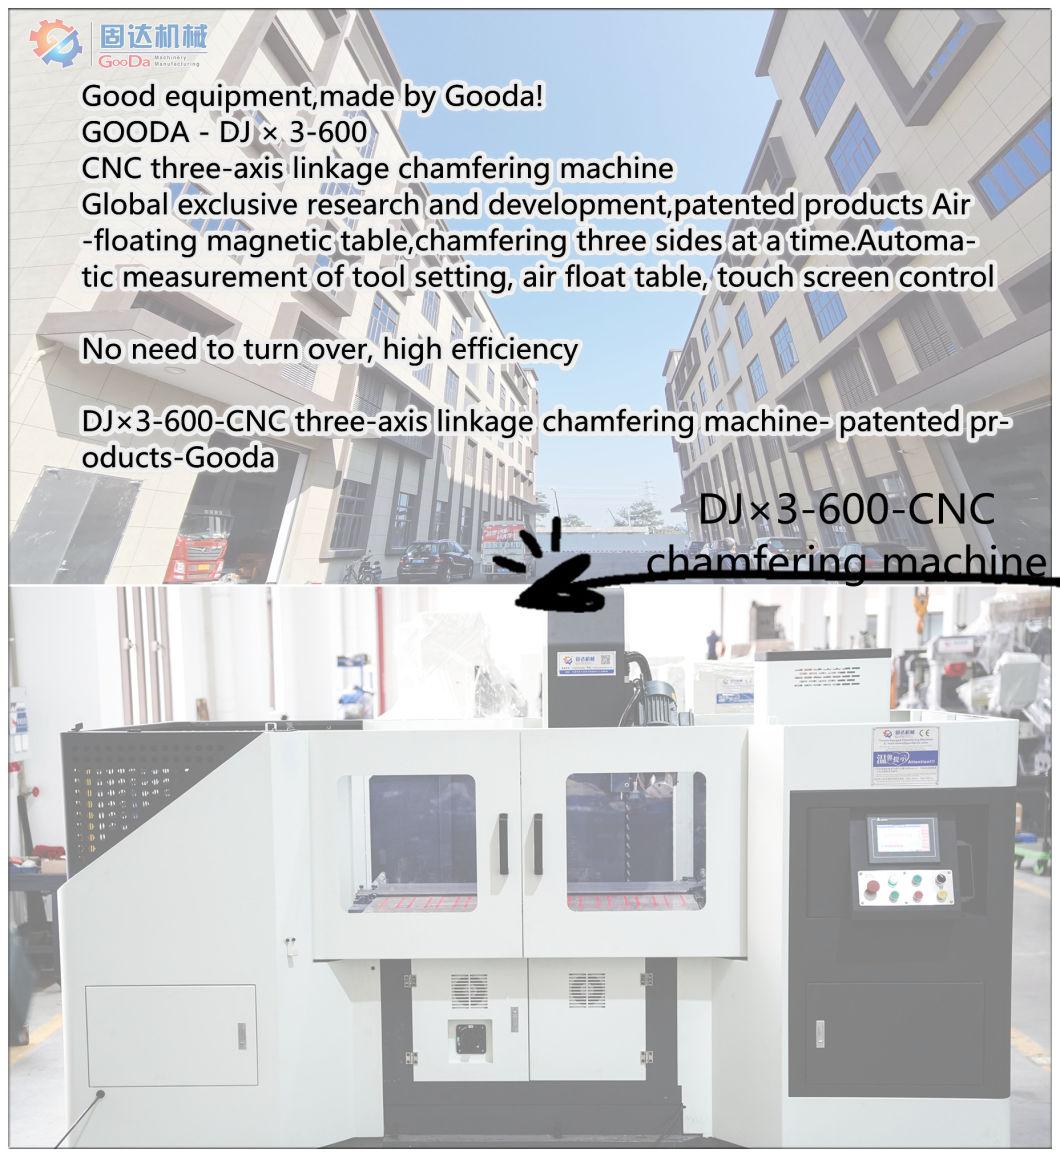 Gooda Easy Operation Chamfering Machine-Electromagnetic Worktable Automatically Chamfer Machine Famous Brand, Steady Property (DJX3-1000-600-XQC)